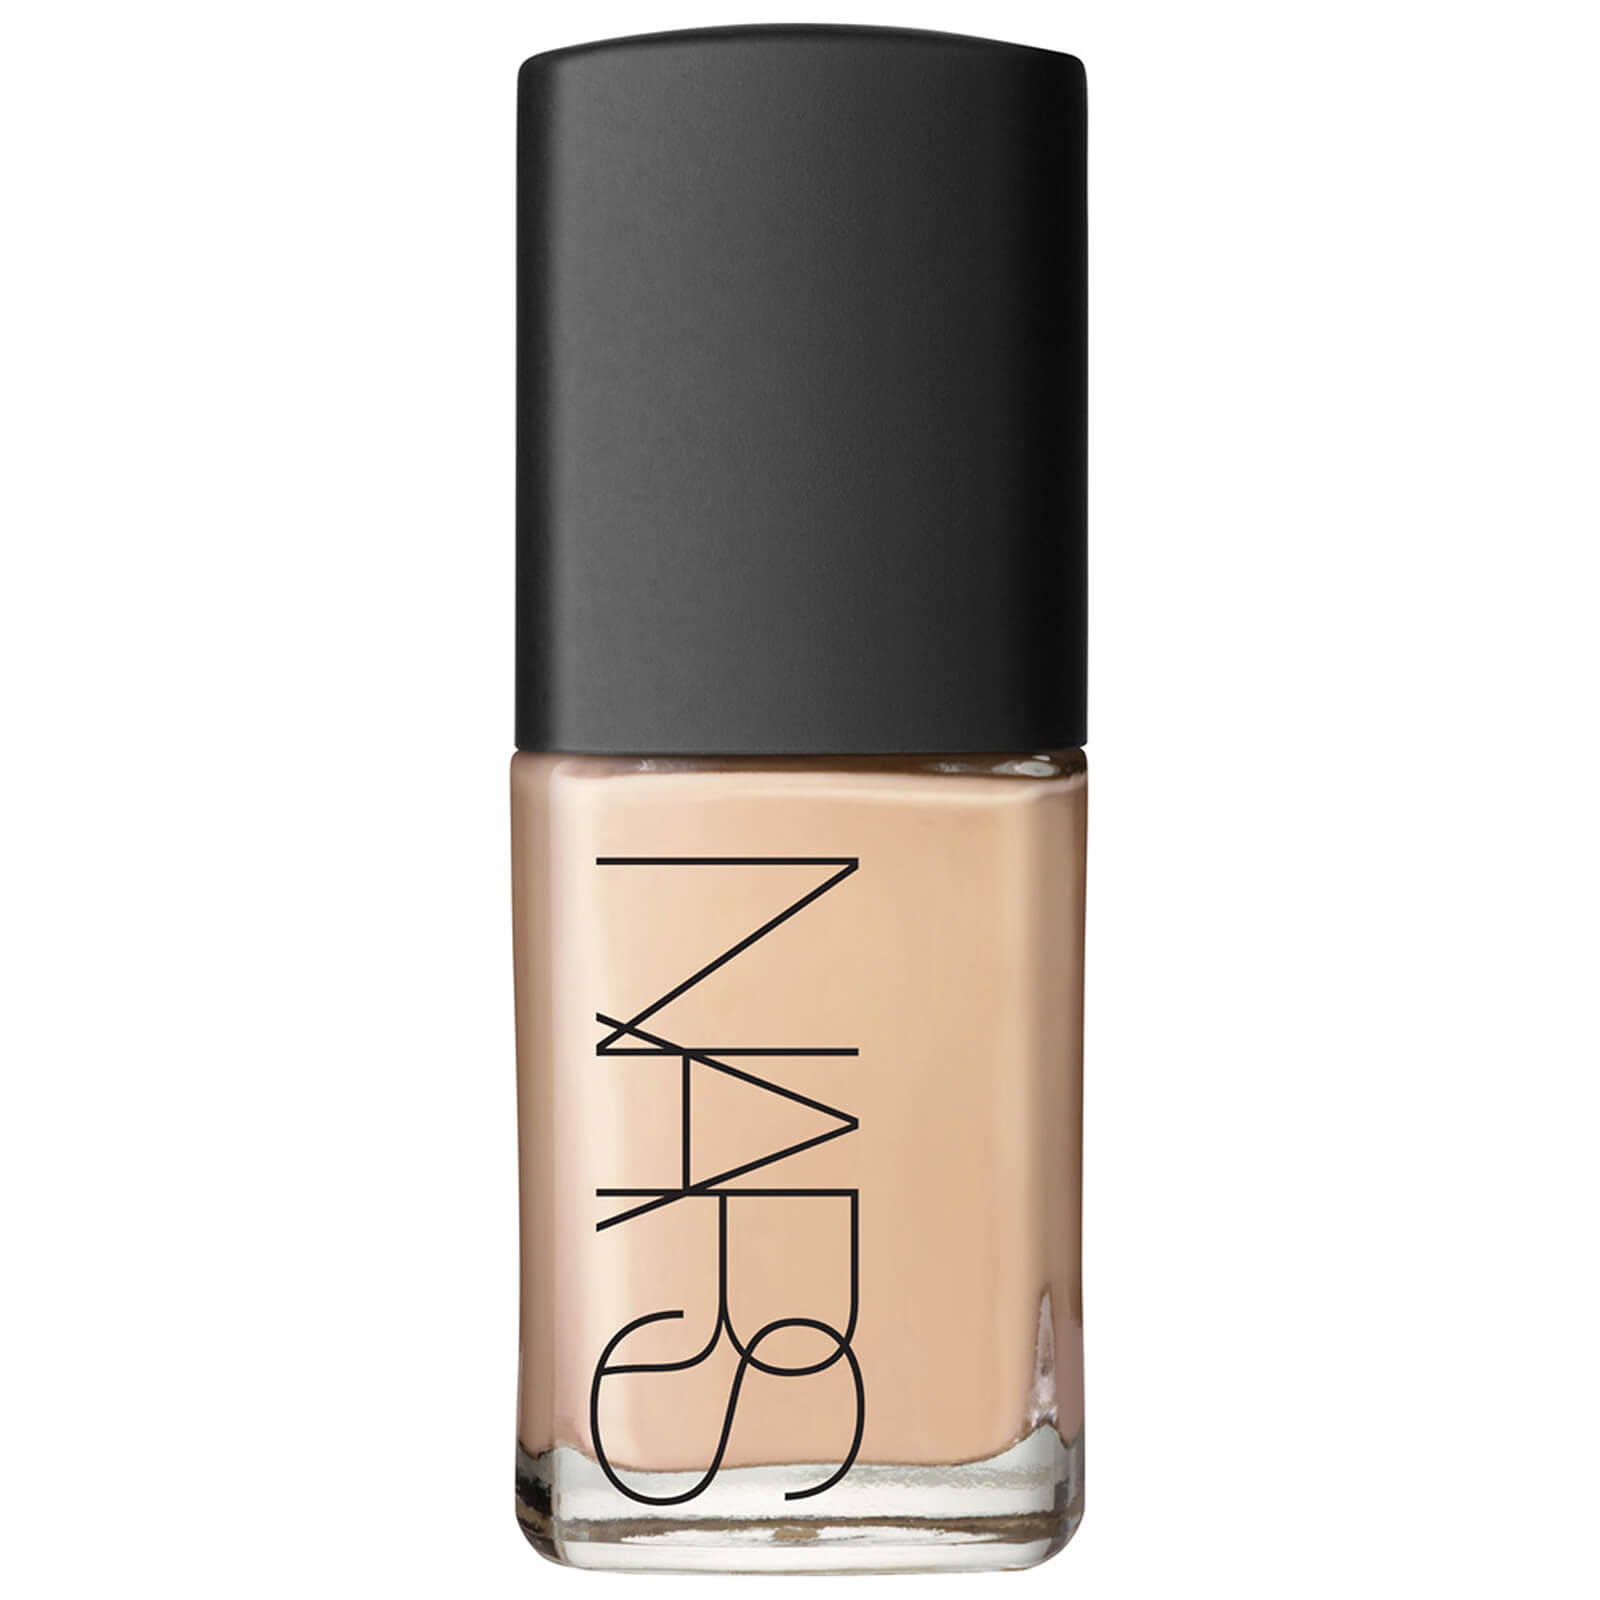 Nars Cosmetics Sheer Glow Foundation (various Shades) - Deauville In White